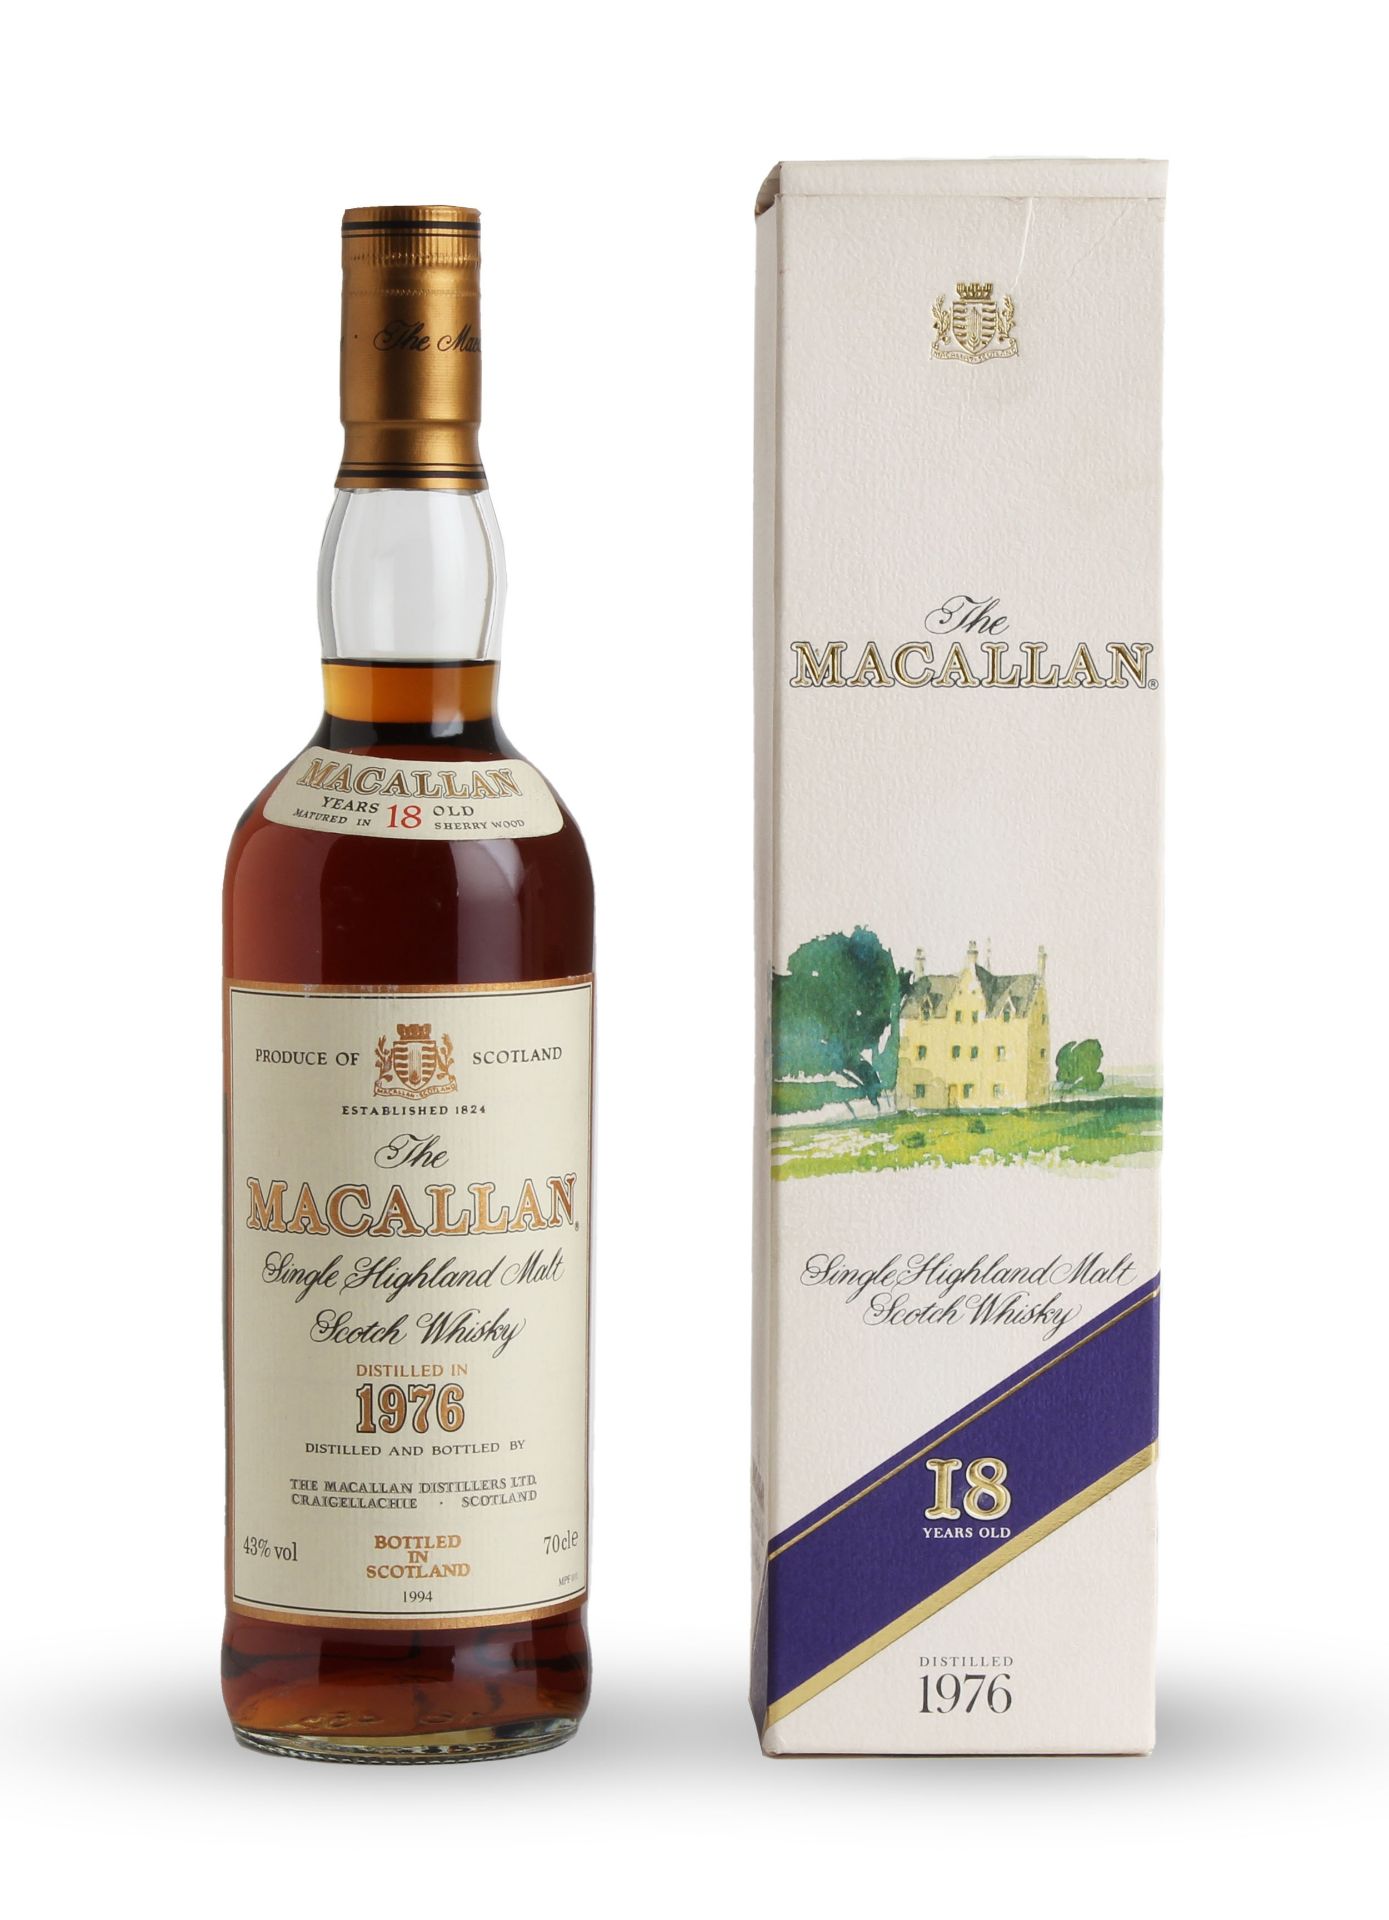 The Macallan-18 year old-1976